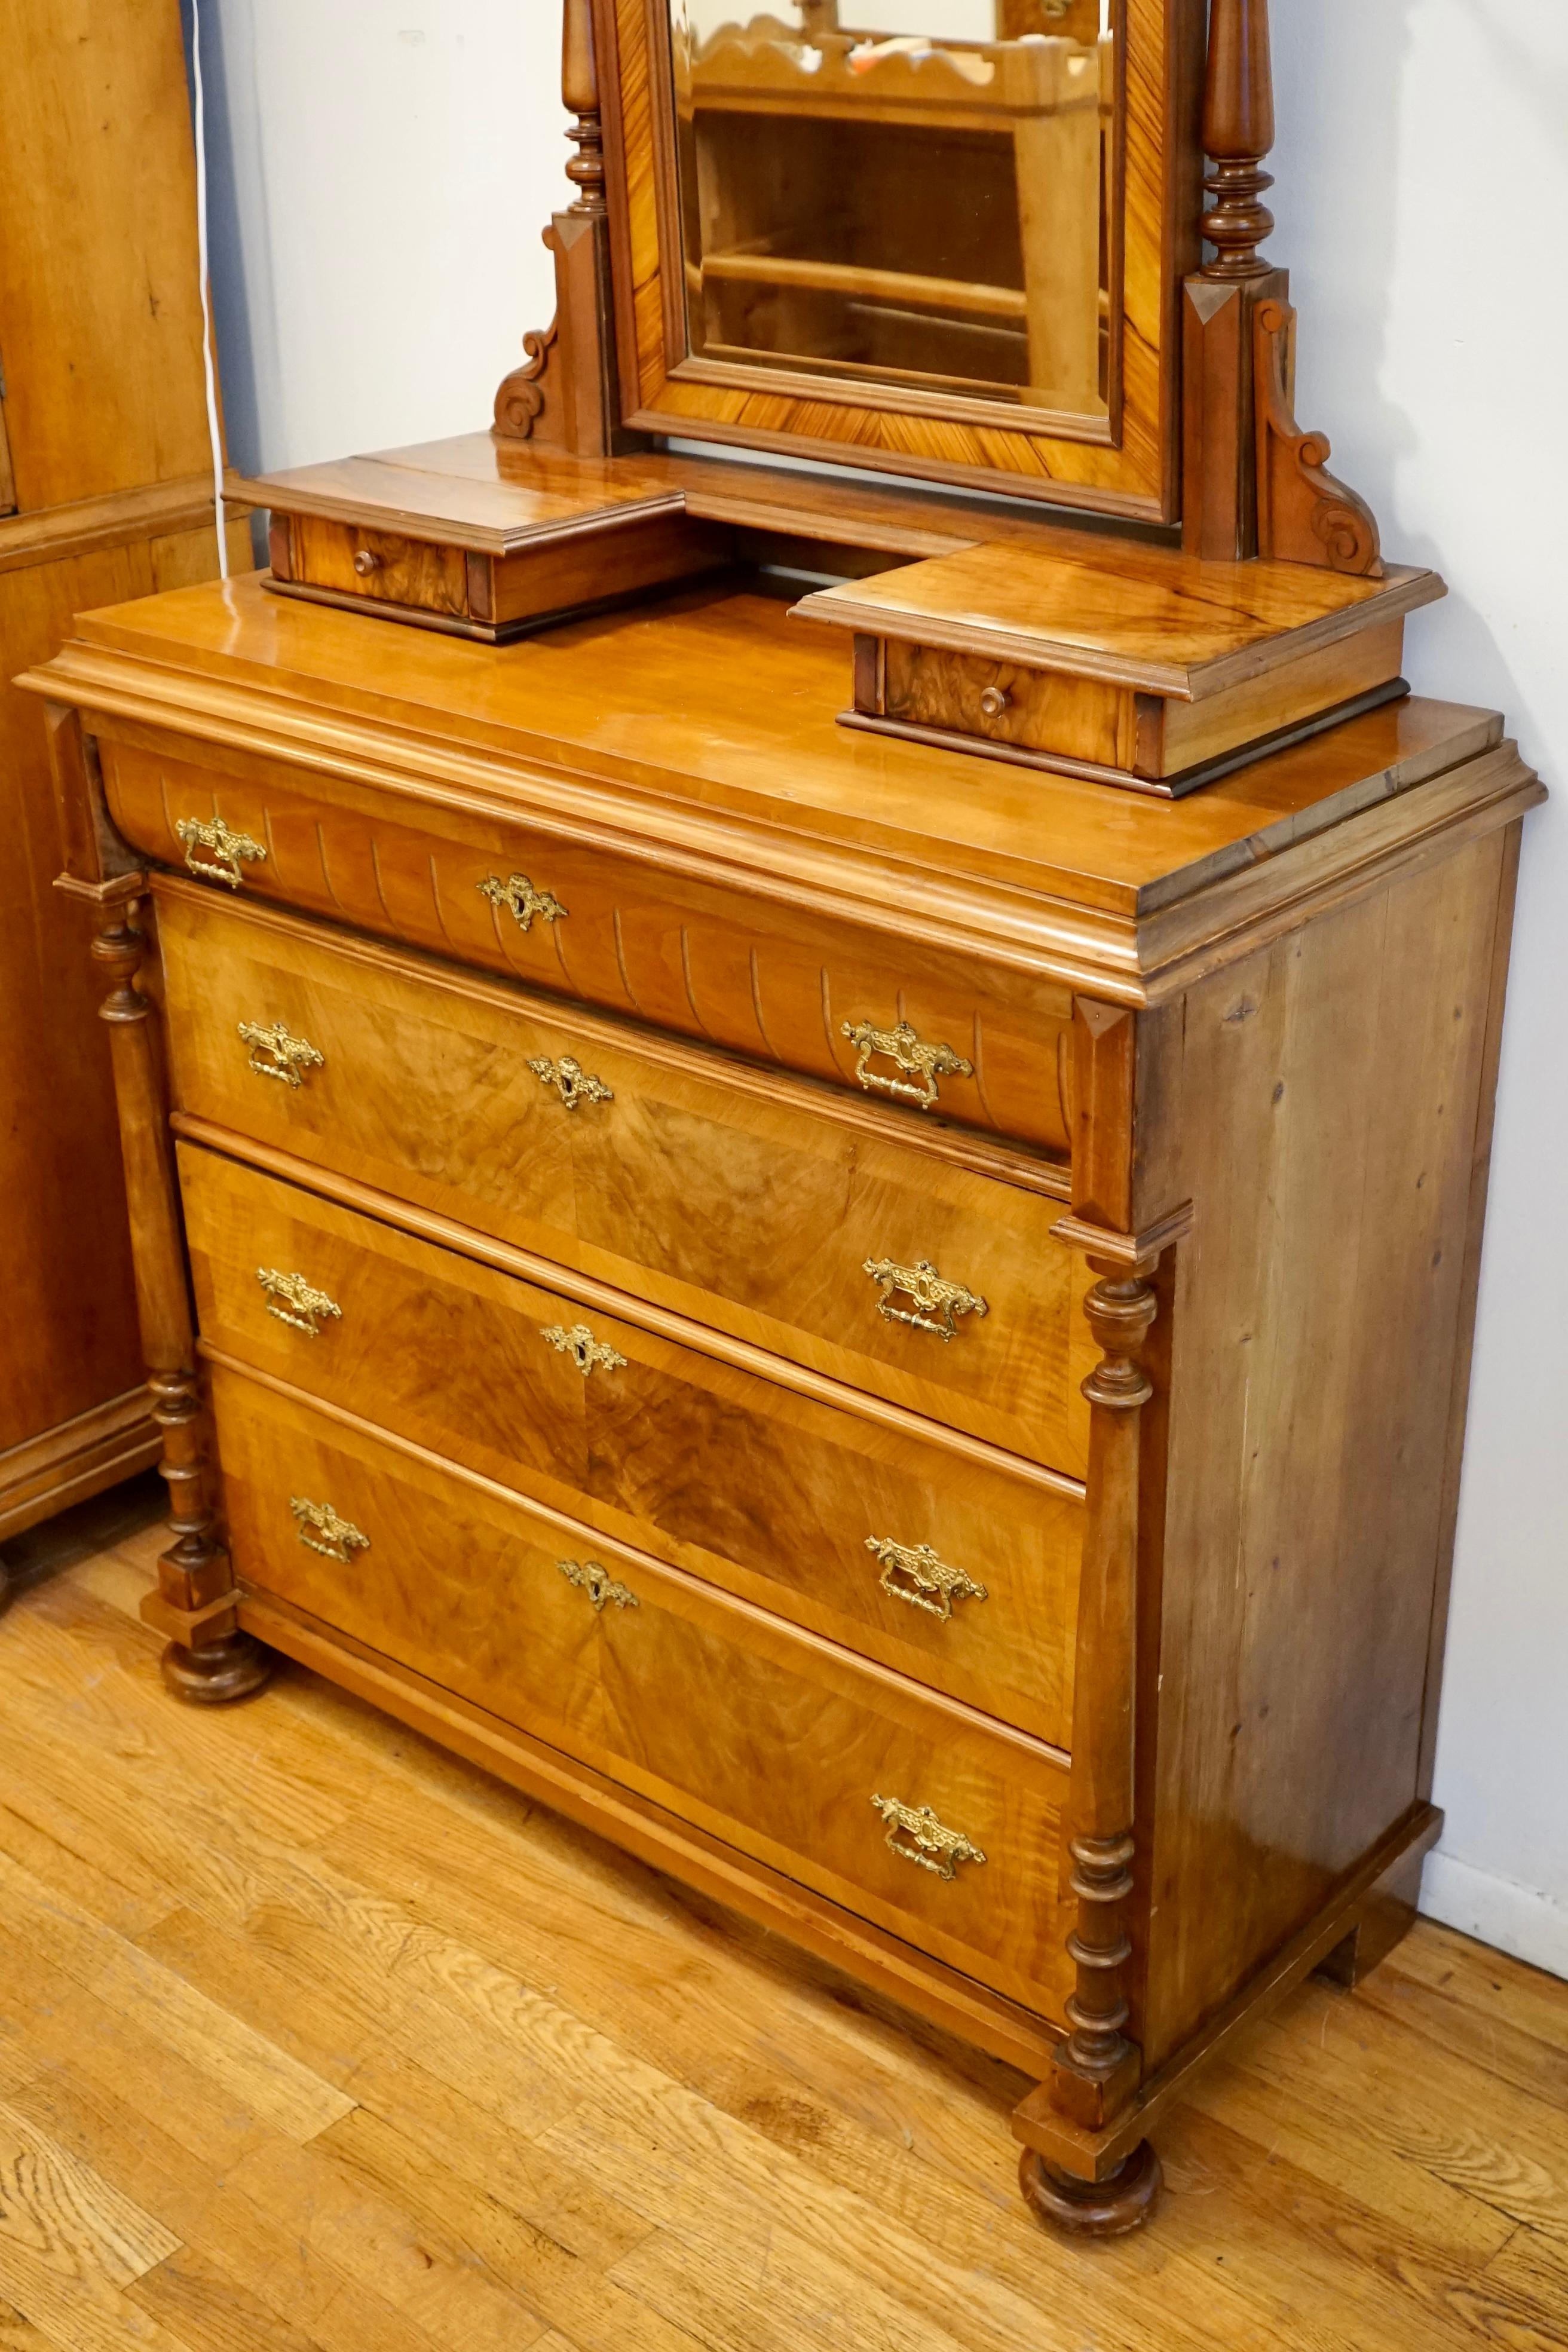 Inlay Renaissance Revival Dresser with Vanity Mirror For Sale